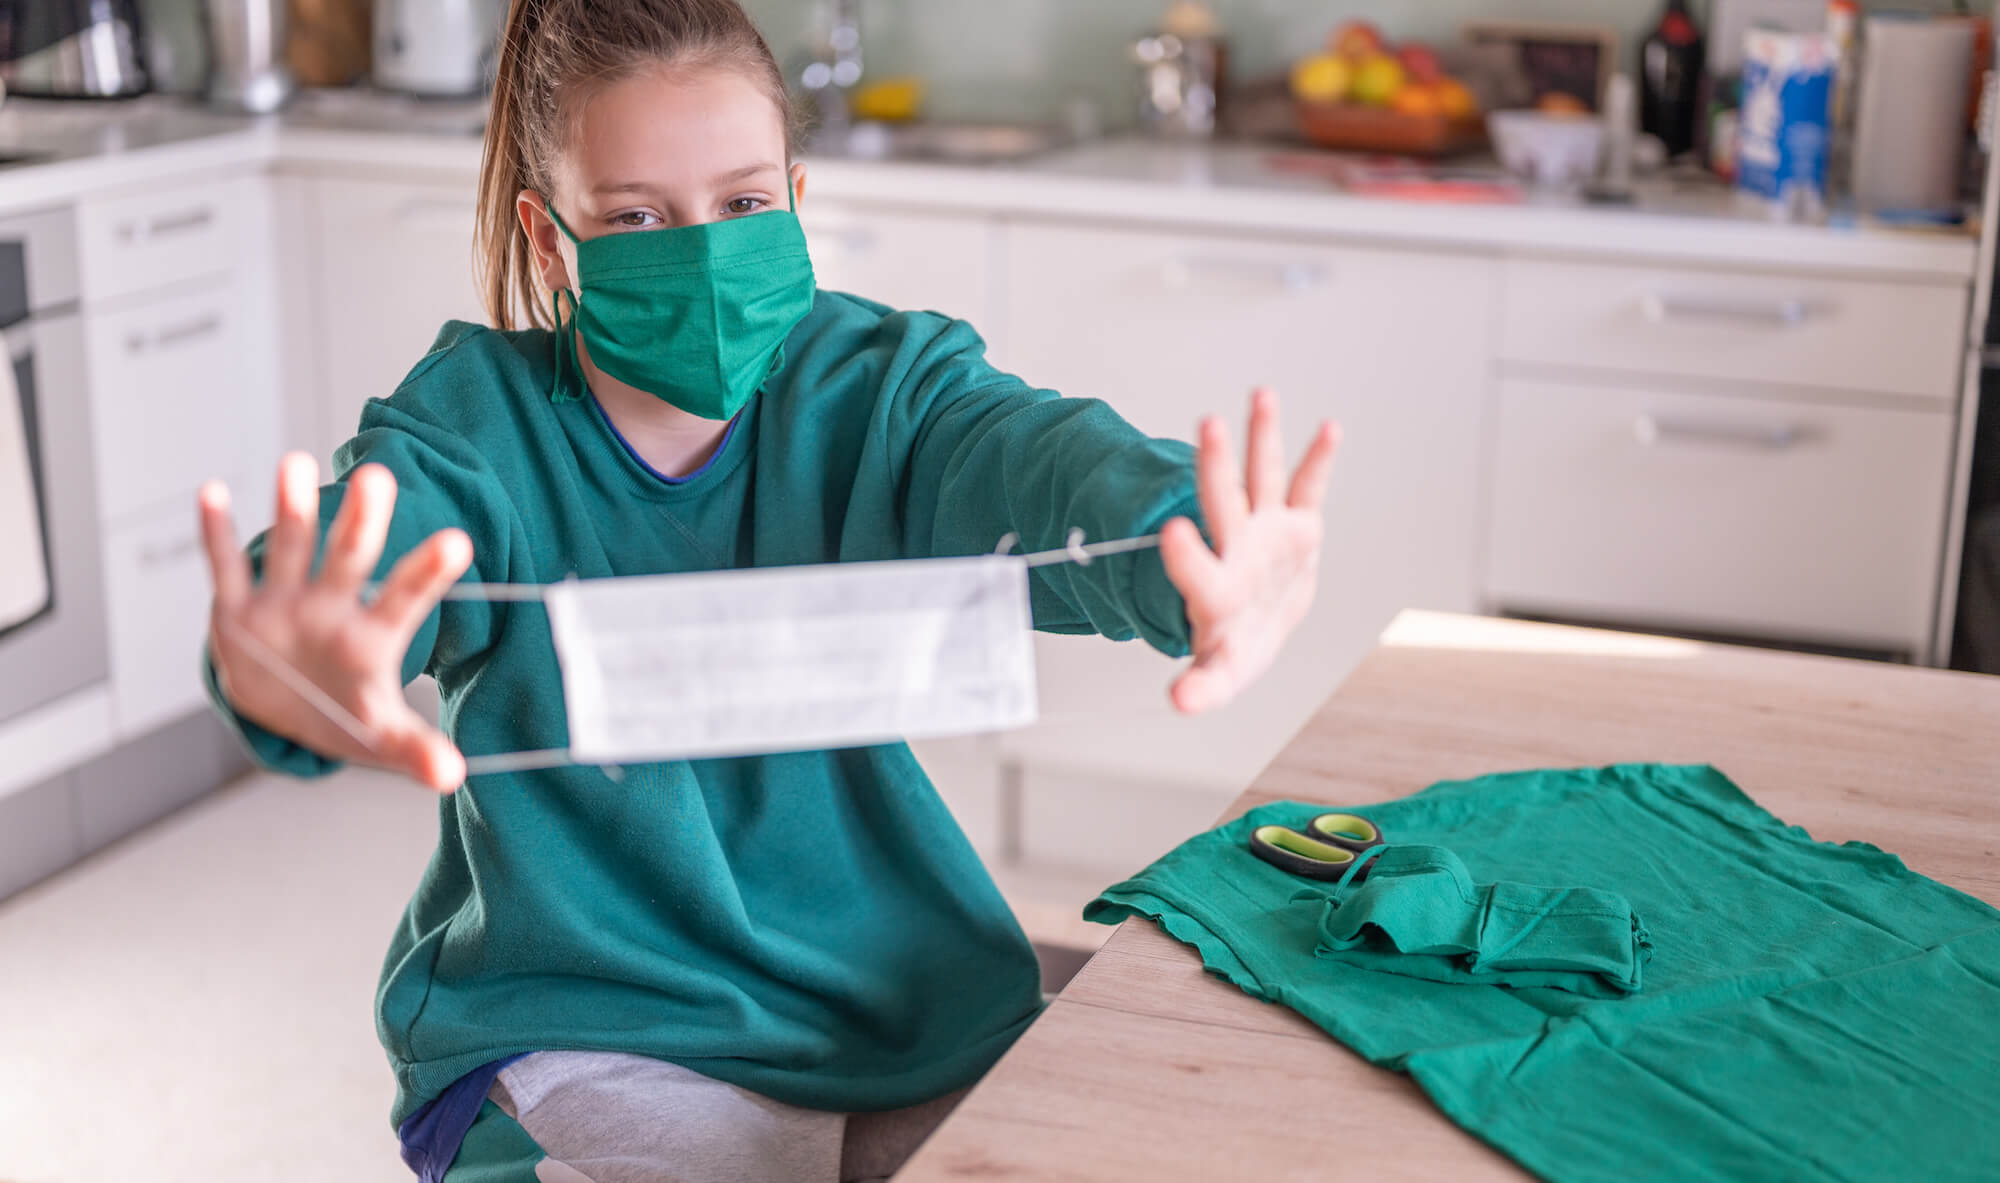 Young girl making a protective face mask at home during the coronavirus Covid-19.